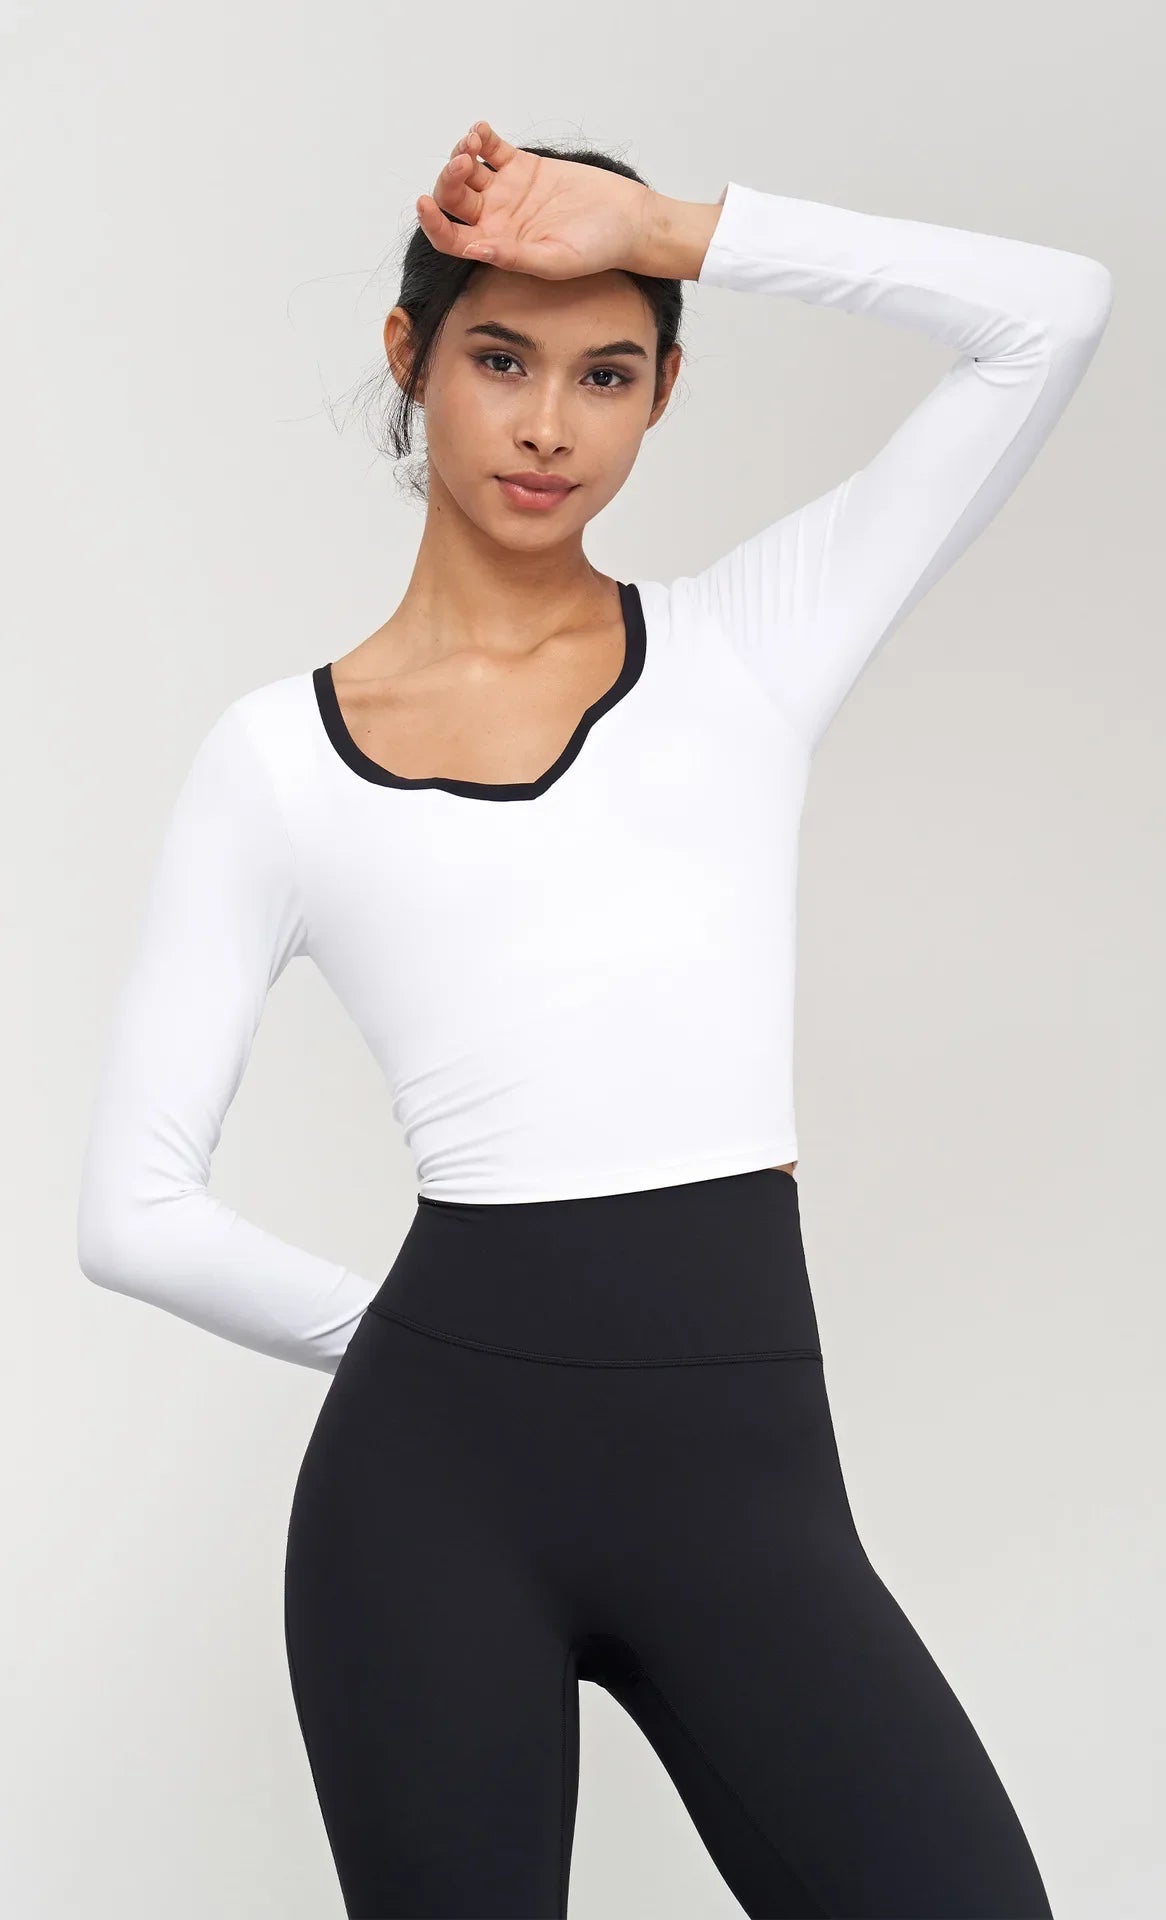 
                  
                    NUF-Contrasting V-neck Yoga Suit with Long Sleeves and Chest Pads, Tight Fitting Short Hem, Fitness Suit, Autumn
                  
                